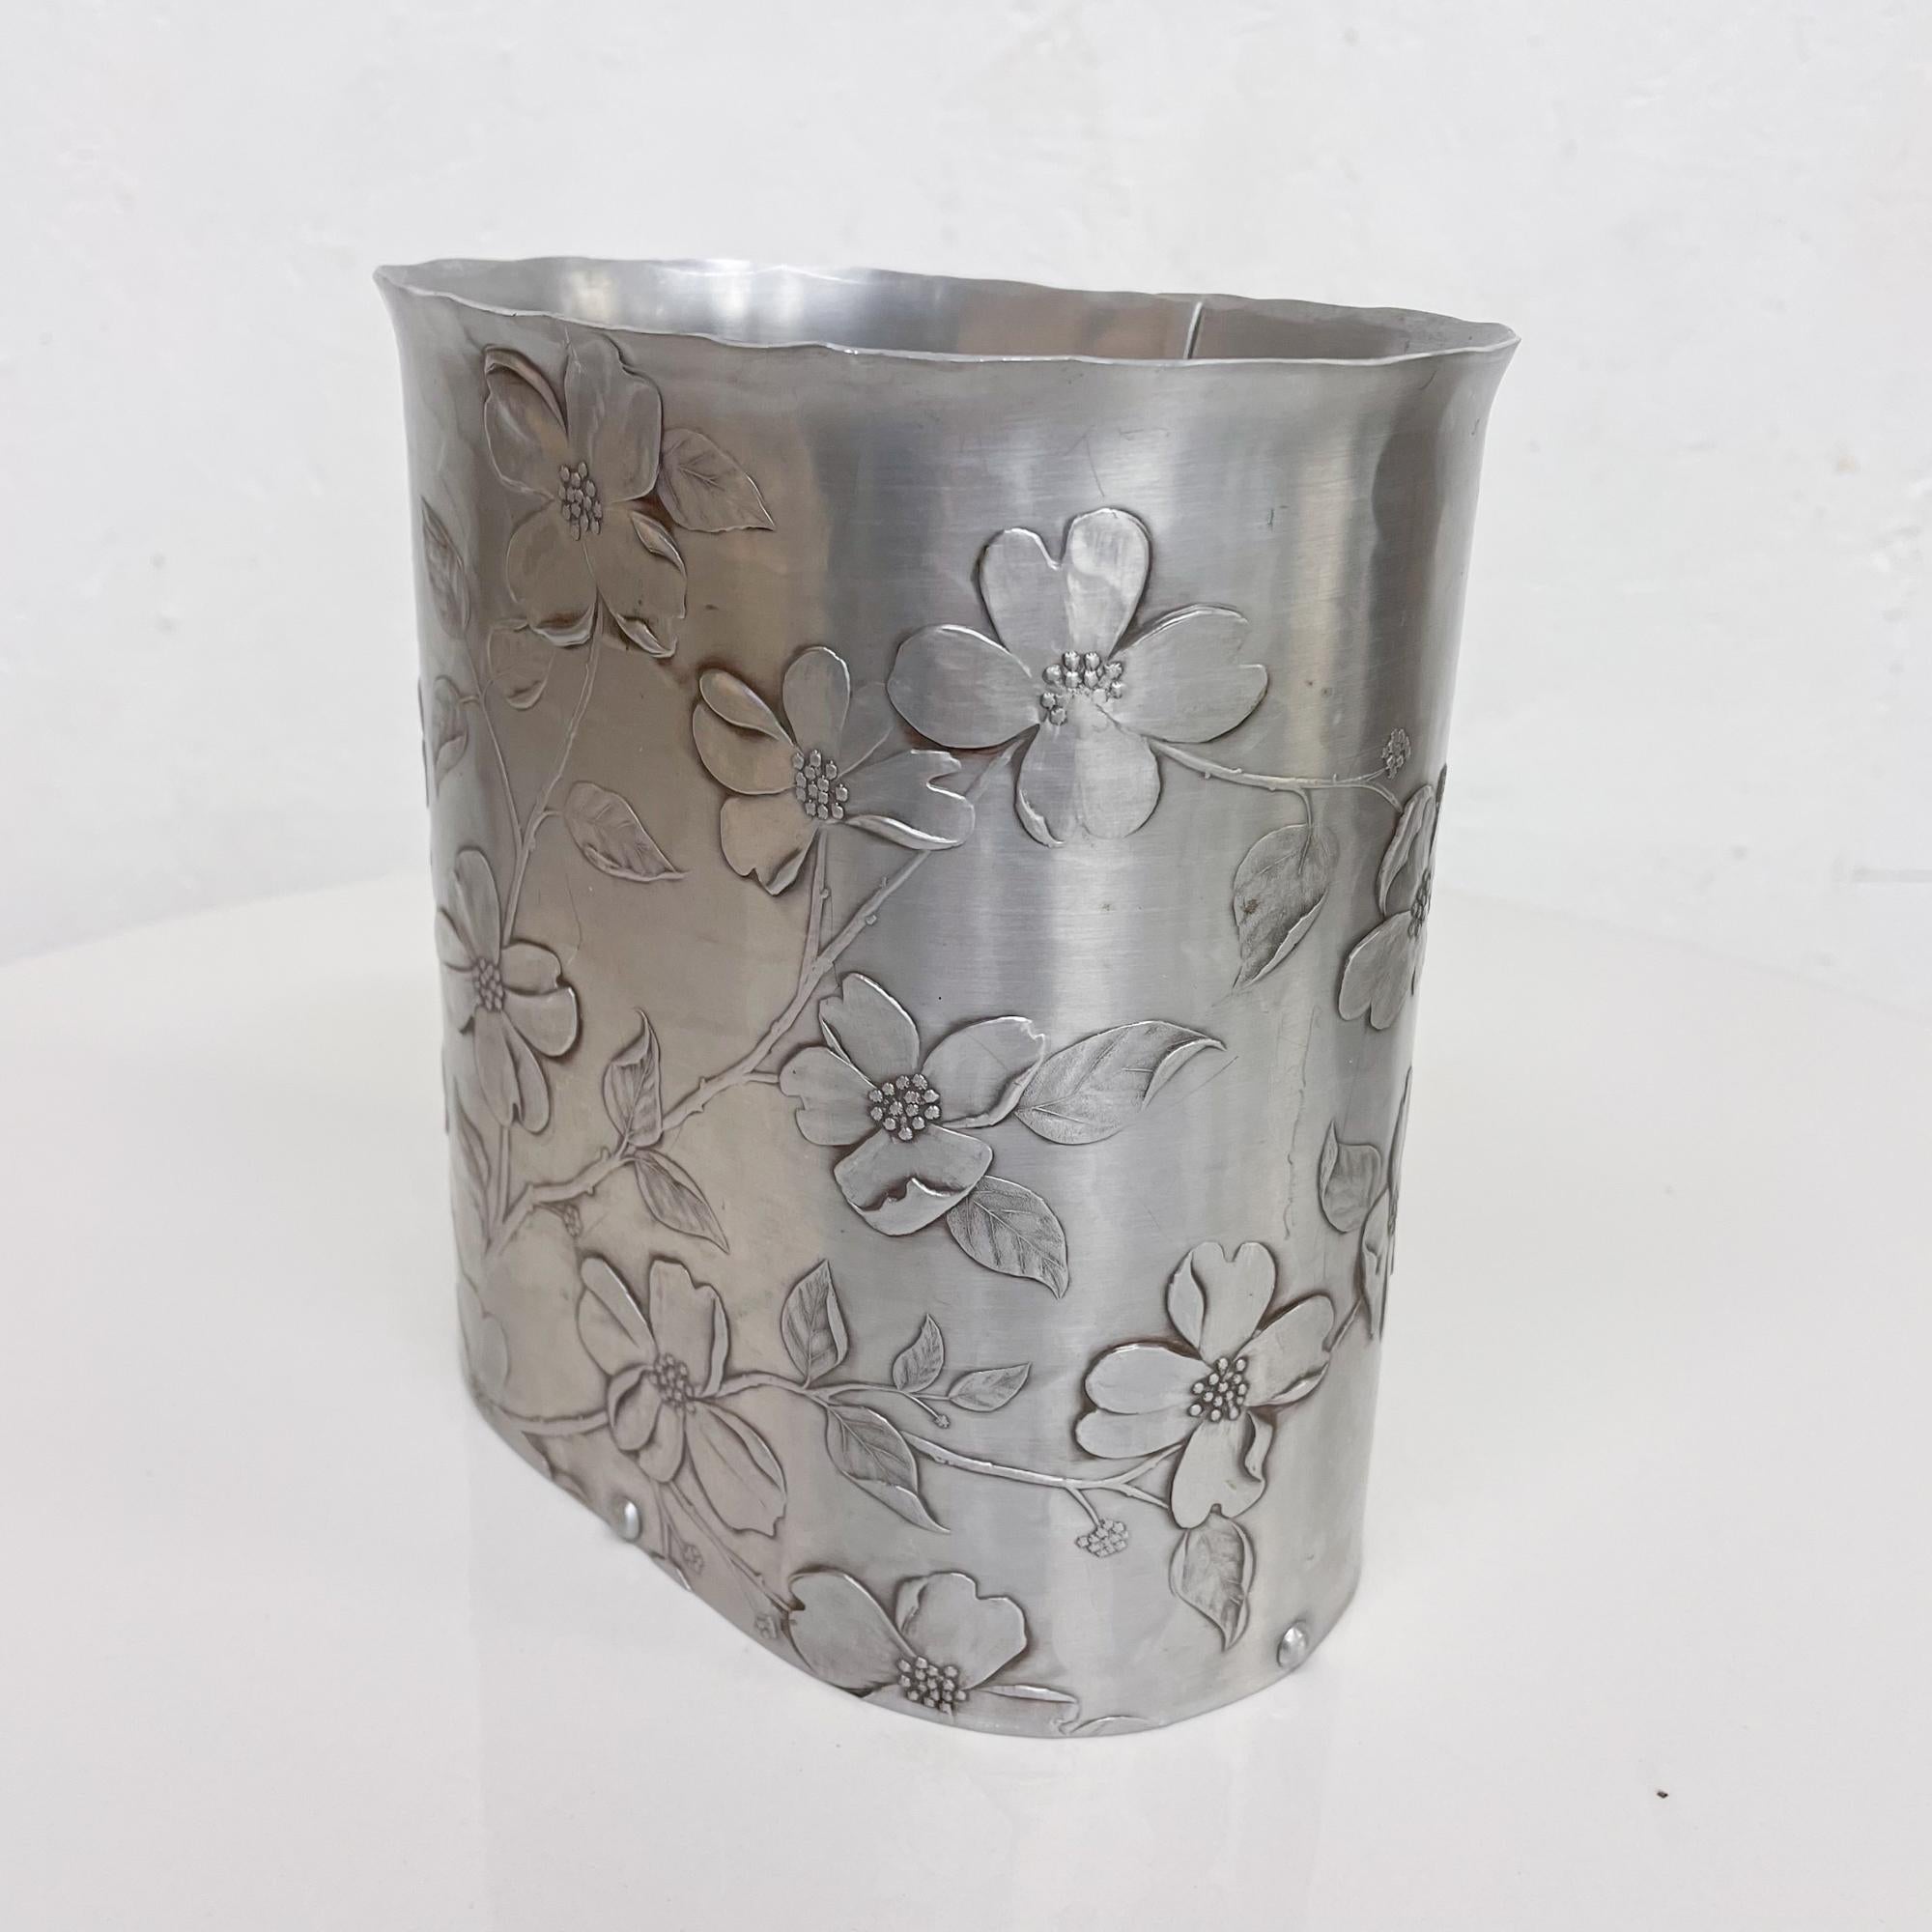 American Wendell August Forge Petite Dogwood Wastebasket Hammered Aluminum Grove City PA